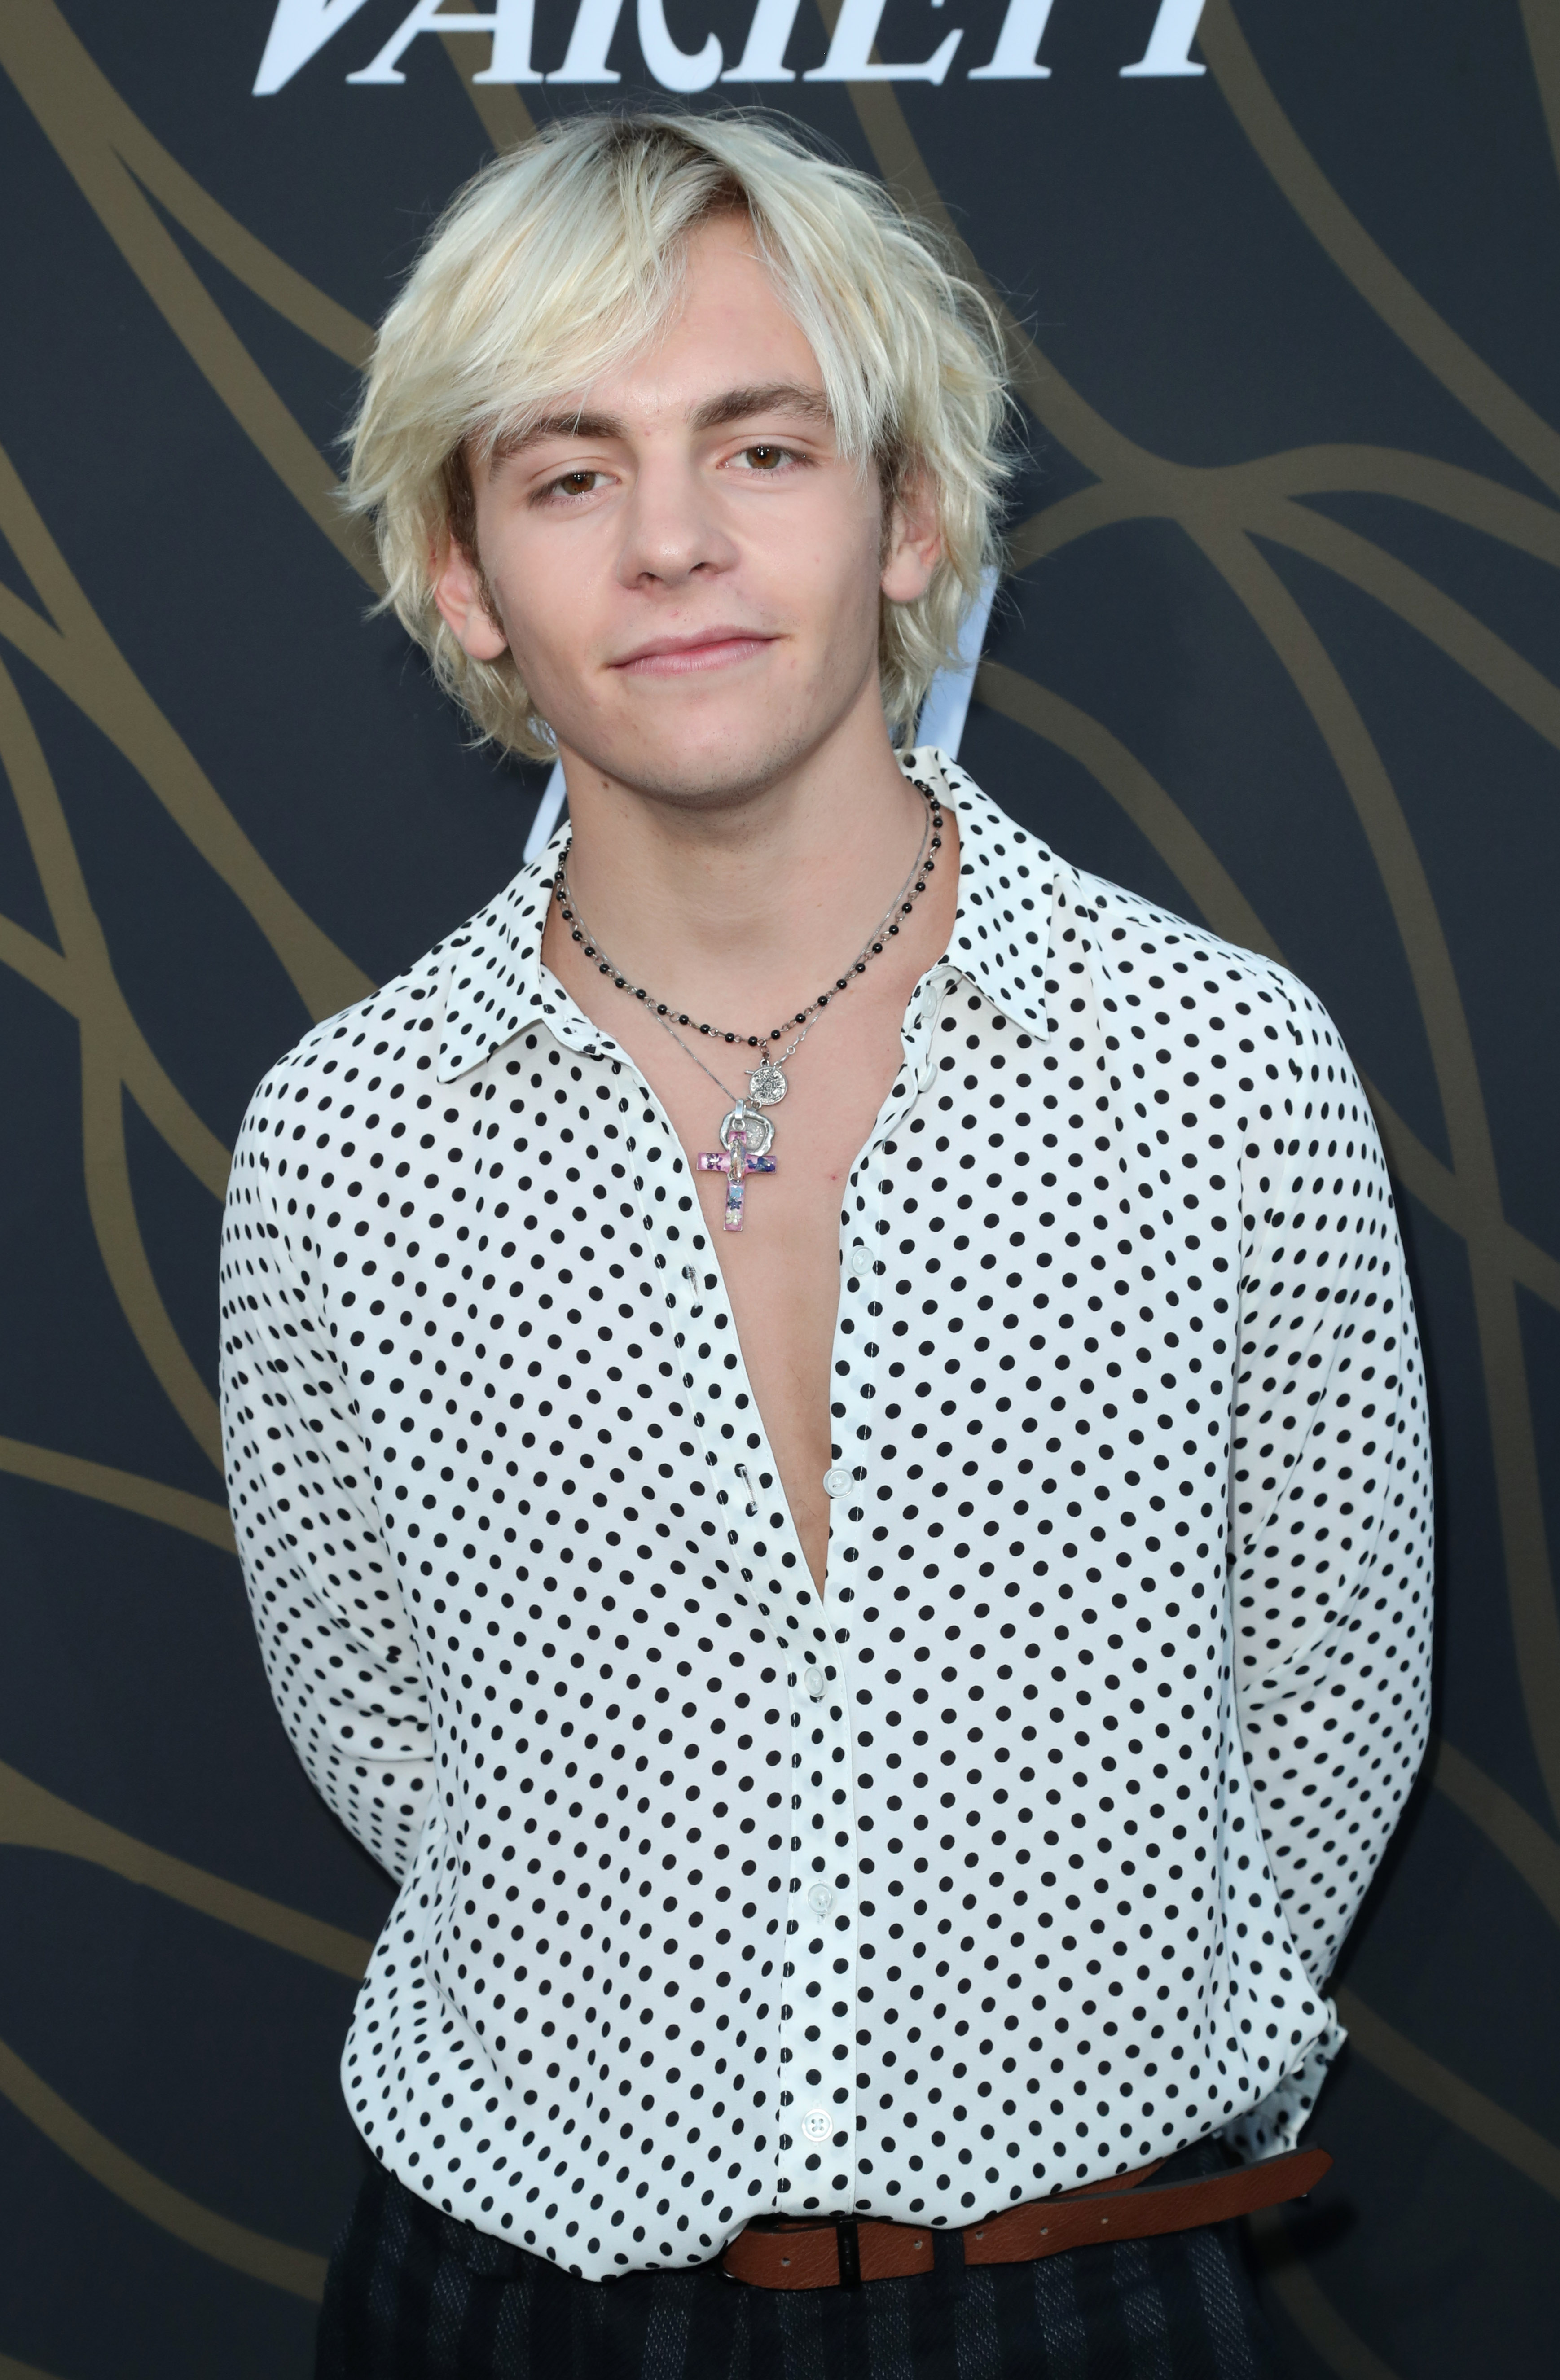 Ross Lynch Over the Years: See His Transformation in Photos